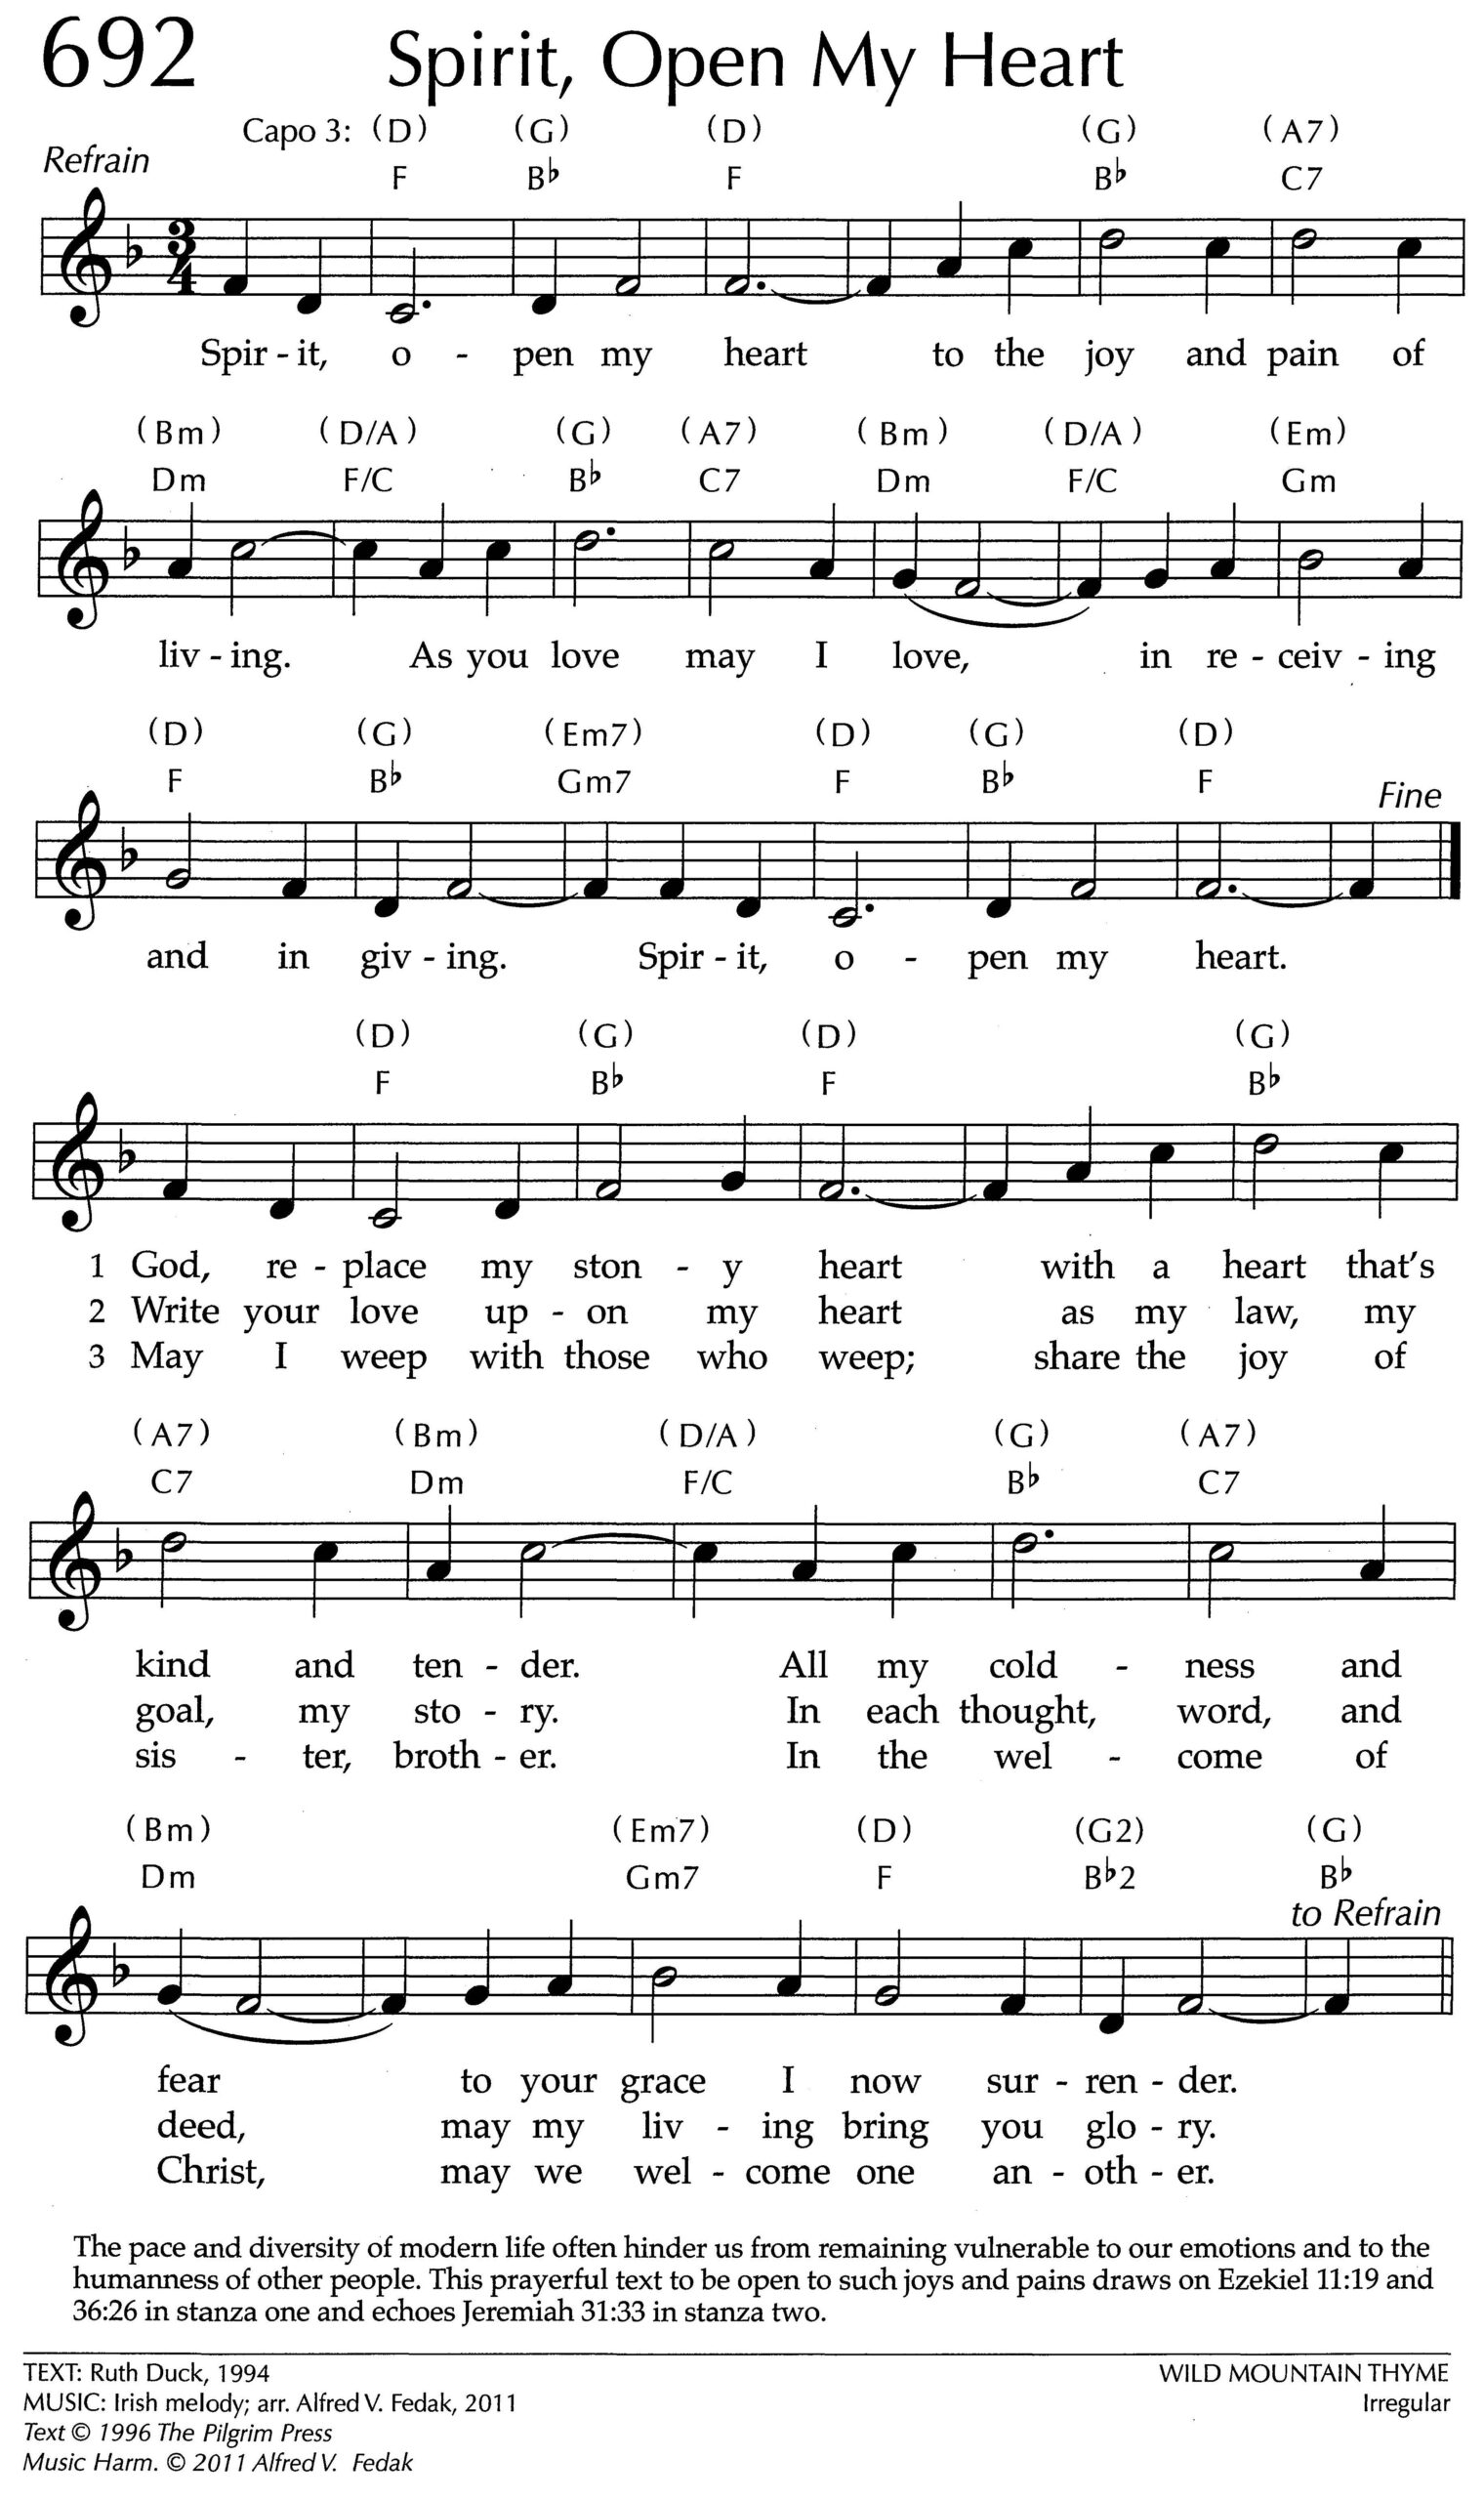 Hymnal page: 692, "Spirit, Open My Heart"